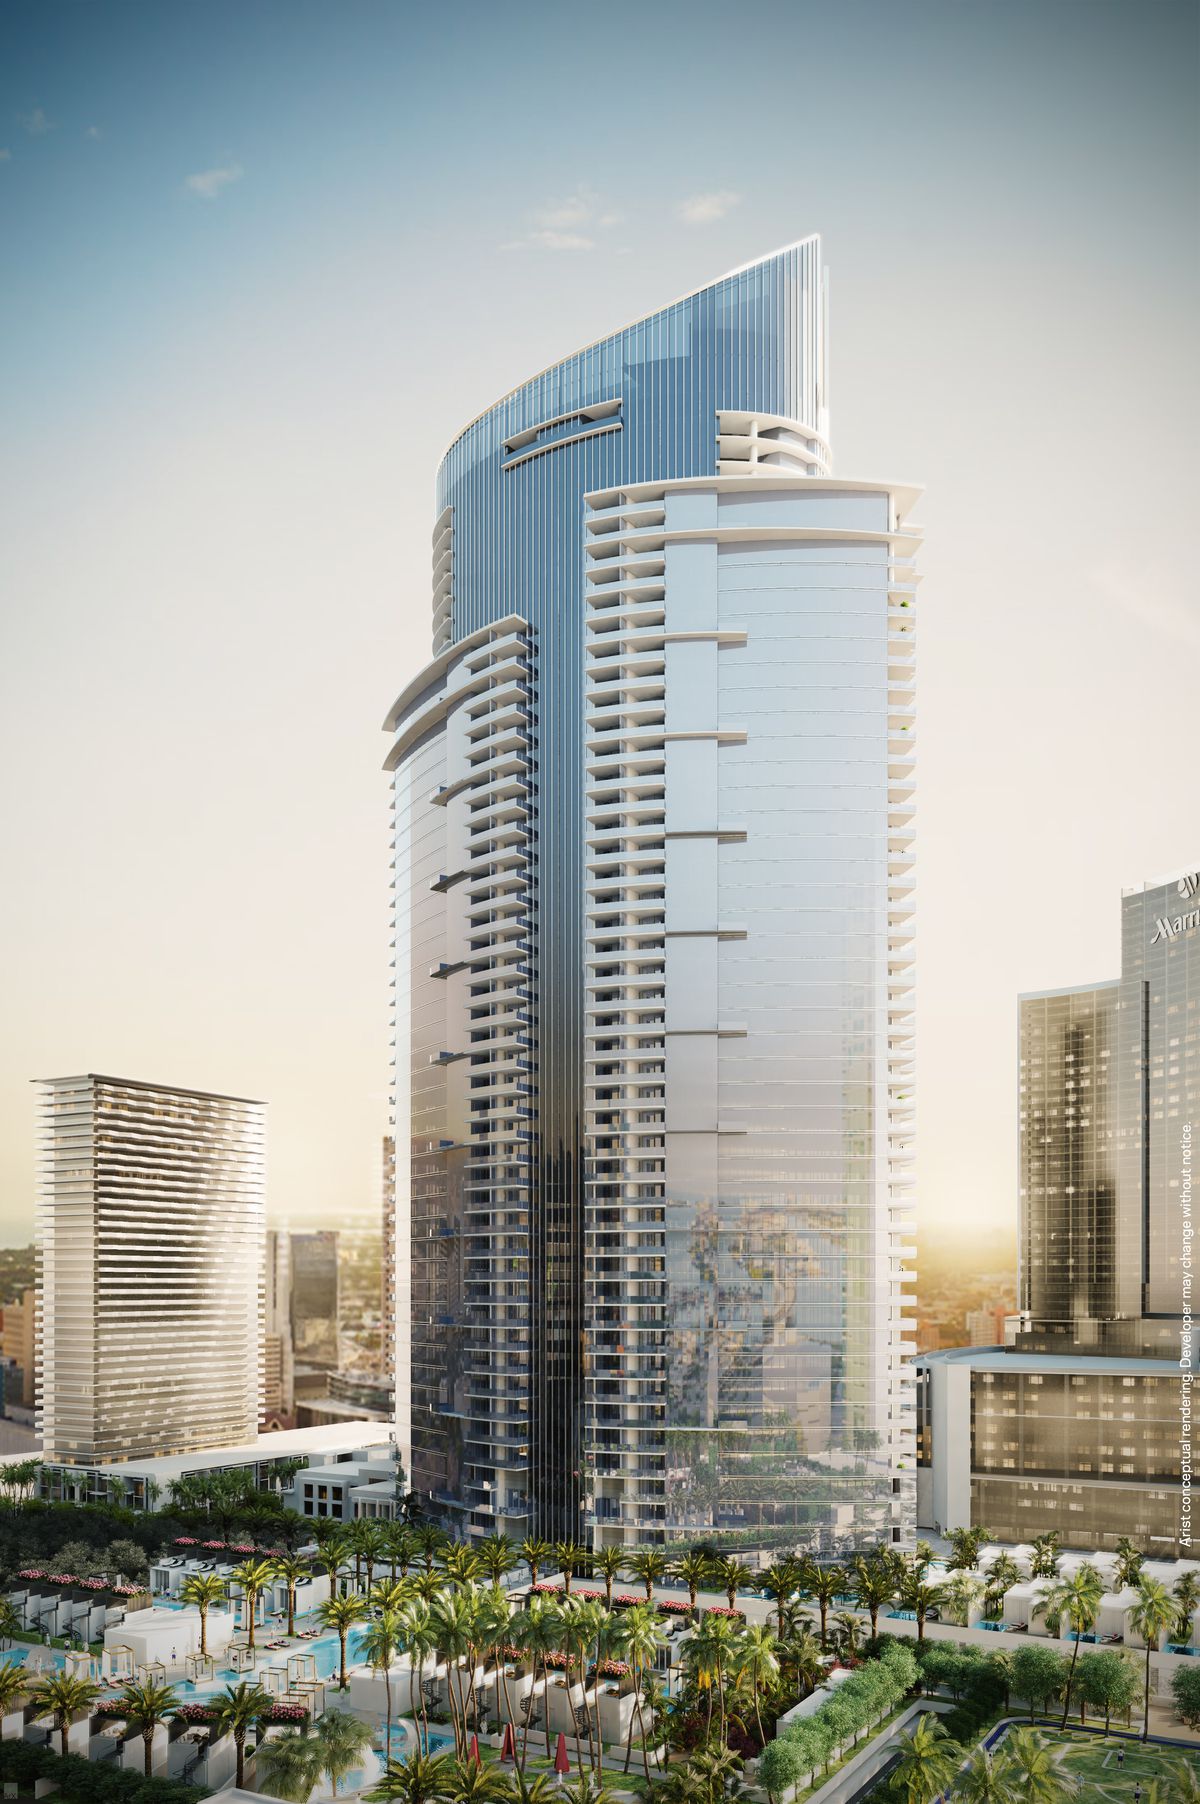 Caoba at Miami Worldcenter apartment tower tops off 